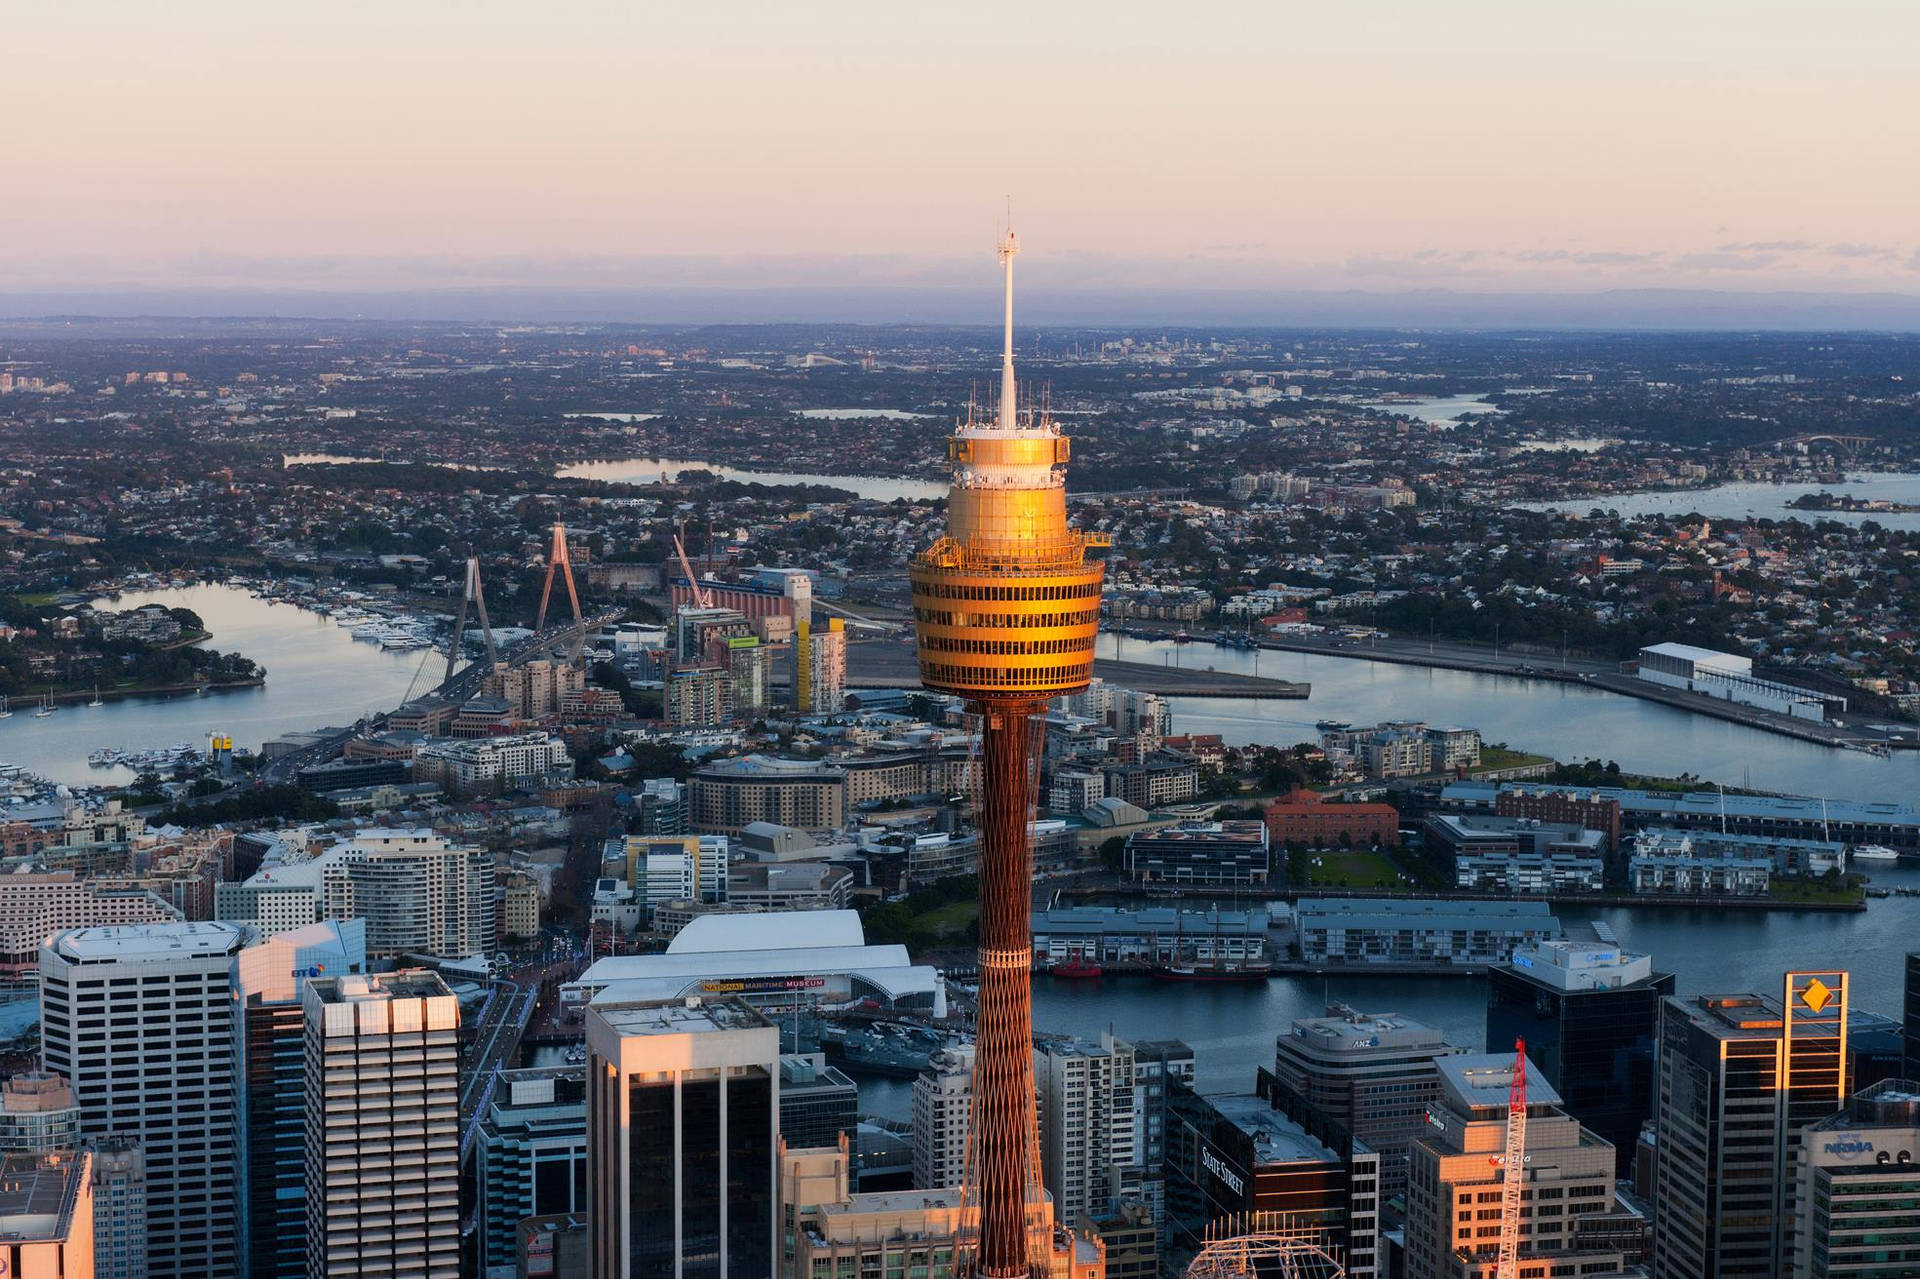 Magnificent view of the Sydney Tower Eye amidst the vibrant cityscape. Wallpaper